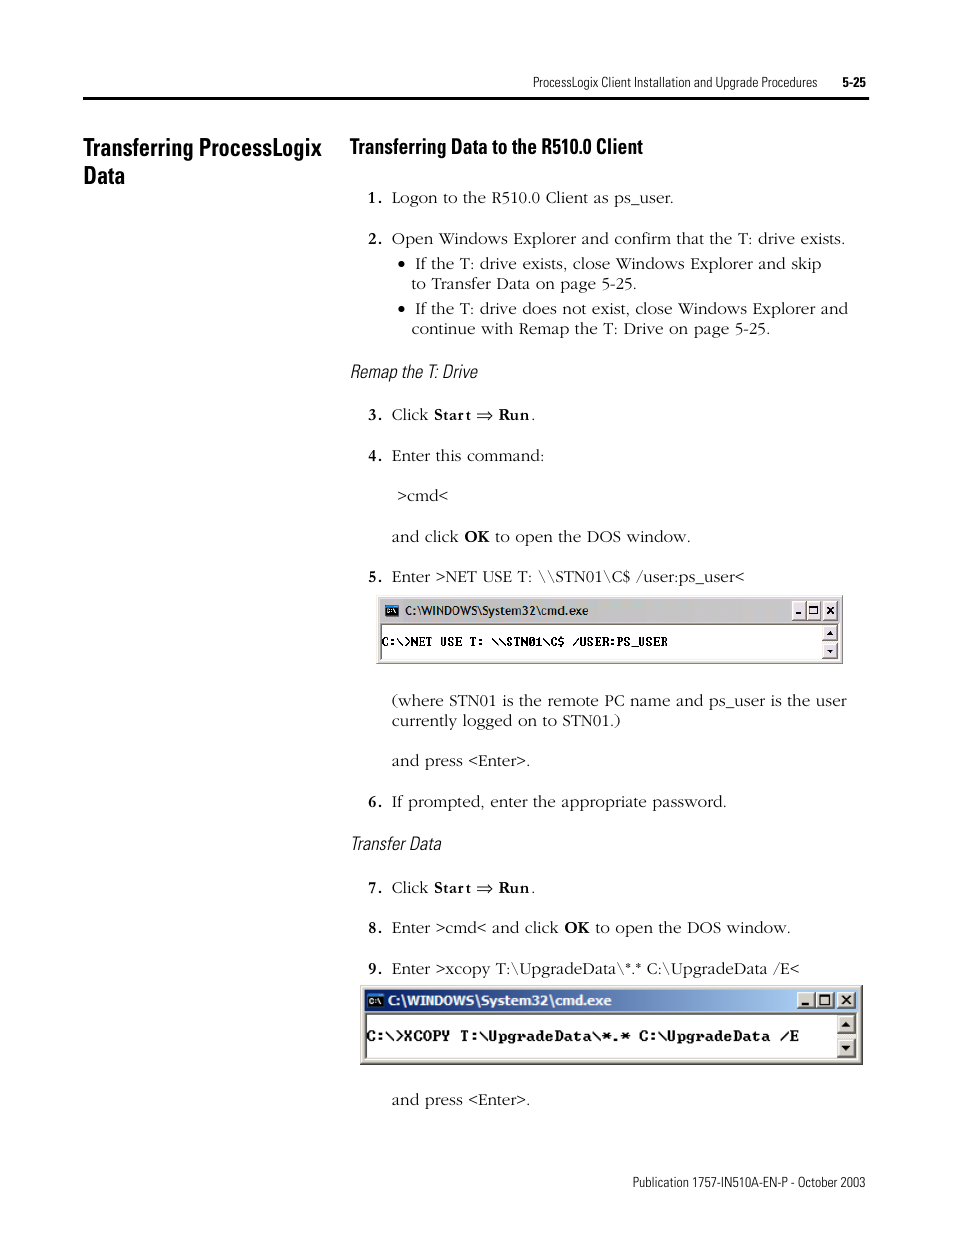 Transferring processlogix data, Transferring data to the r510.0 client, Transferring processlogix data -25 | Transferring data to the r510.0 client -25 | Rockwell Automation 1757-SWKIT5100 ProcessLogix R510.0 Installation and Upgrade Guide User Manual | Page 151 / 271